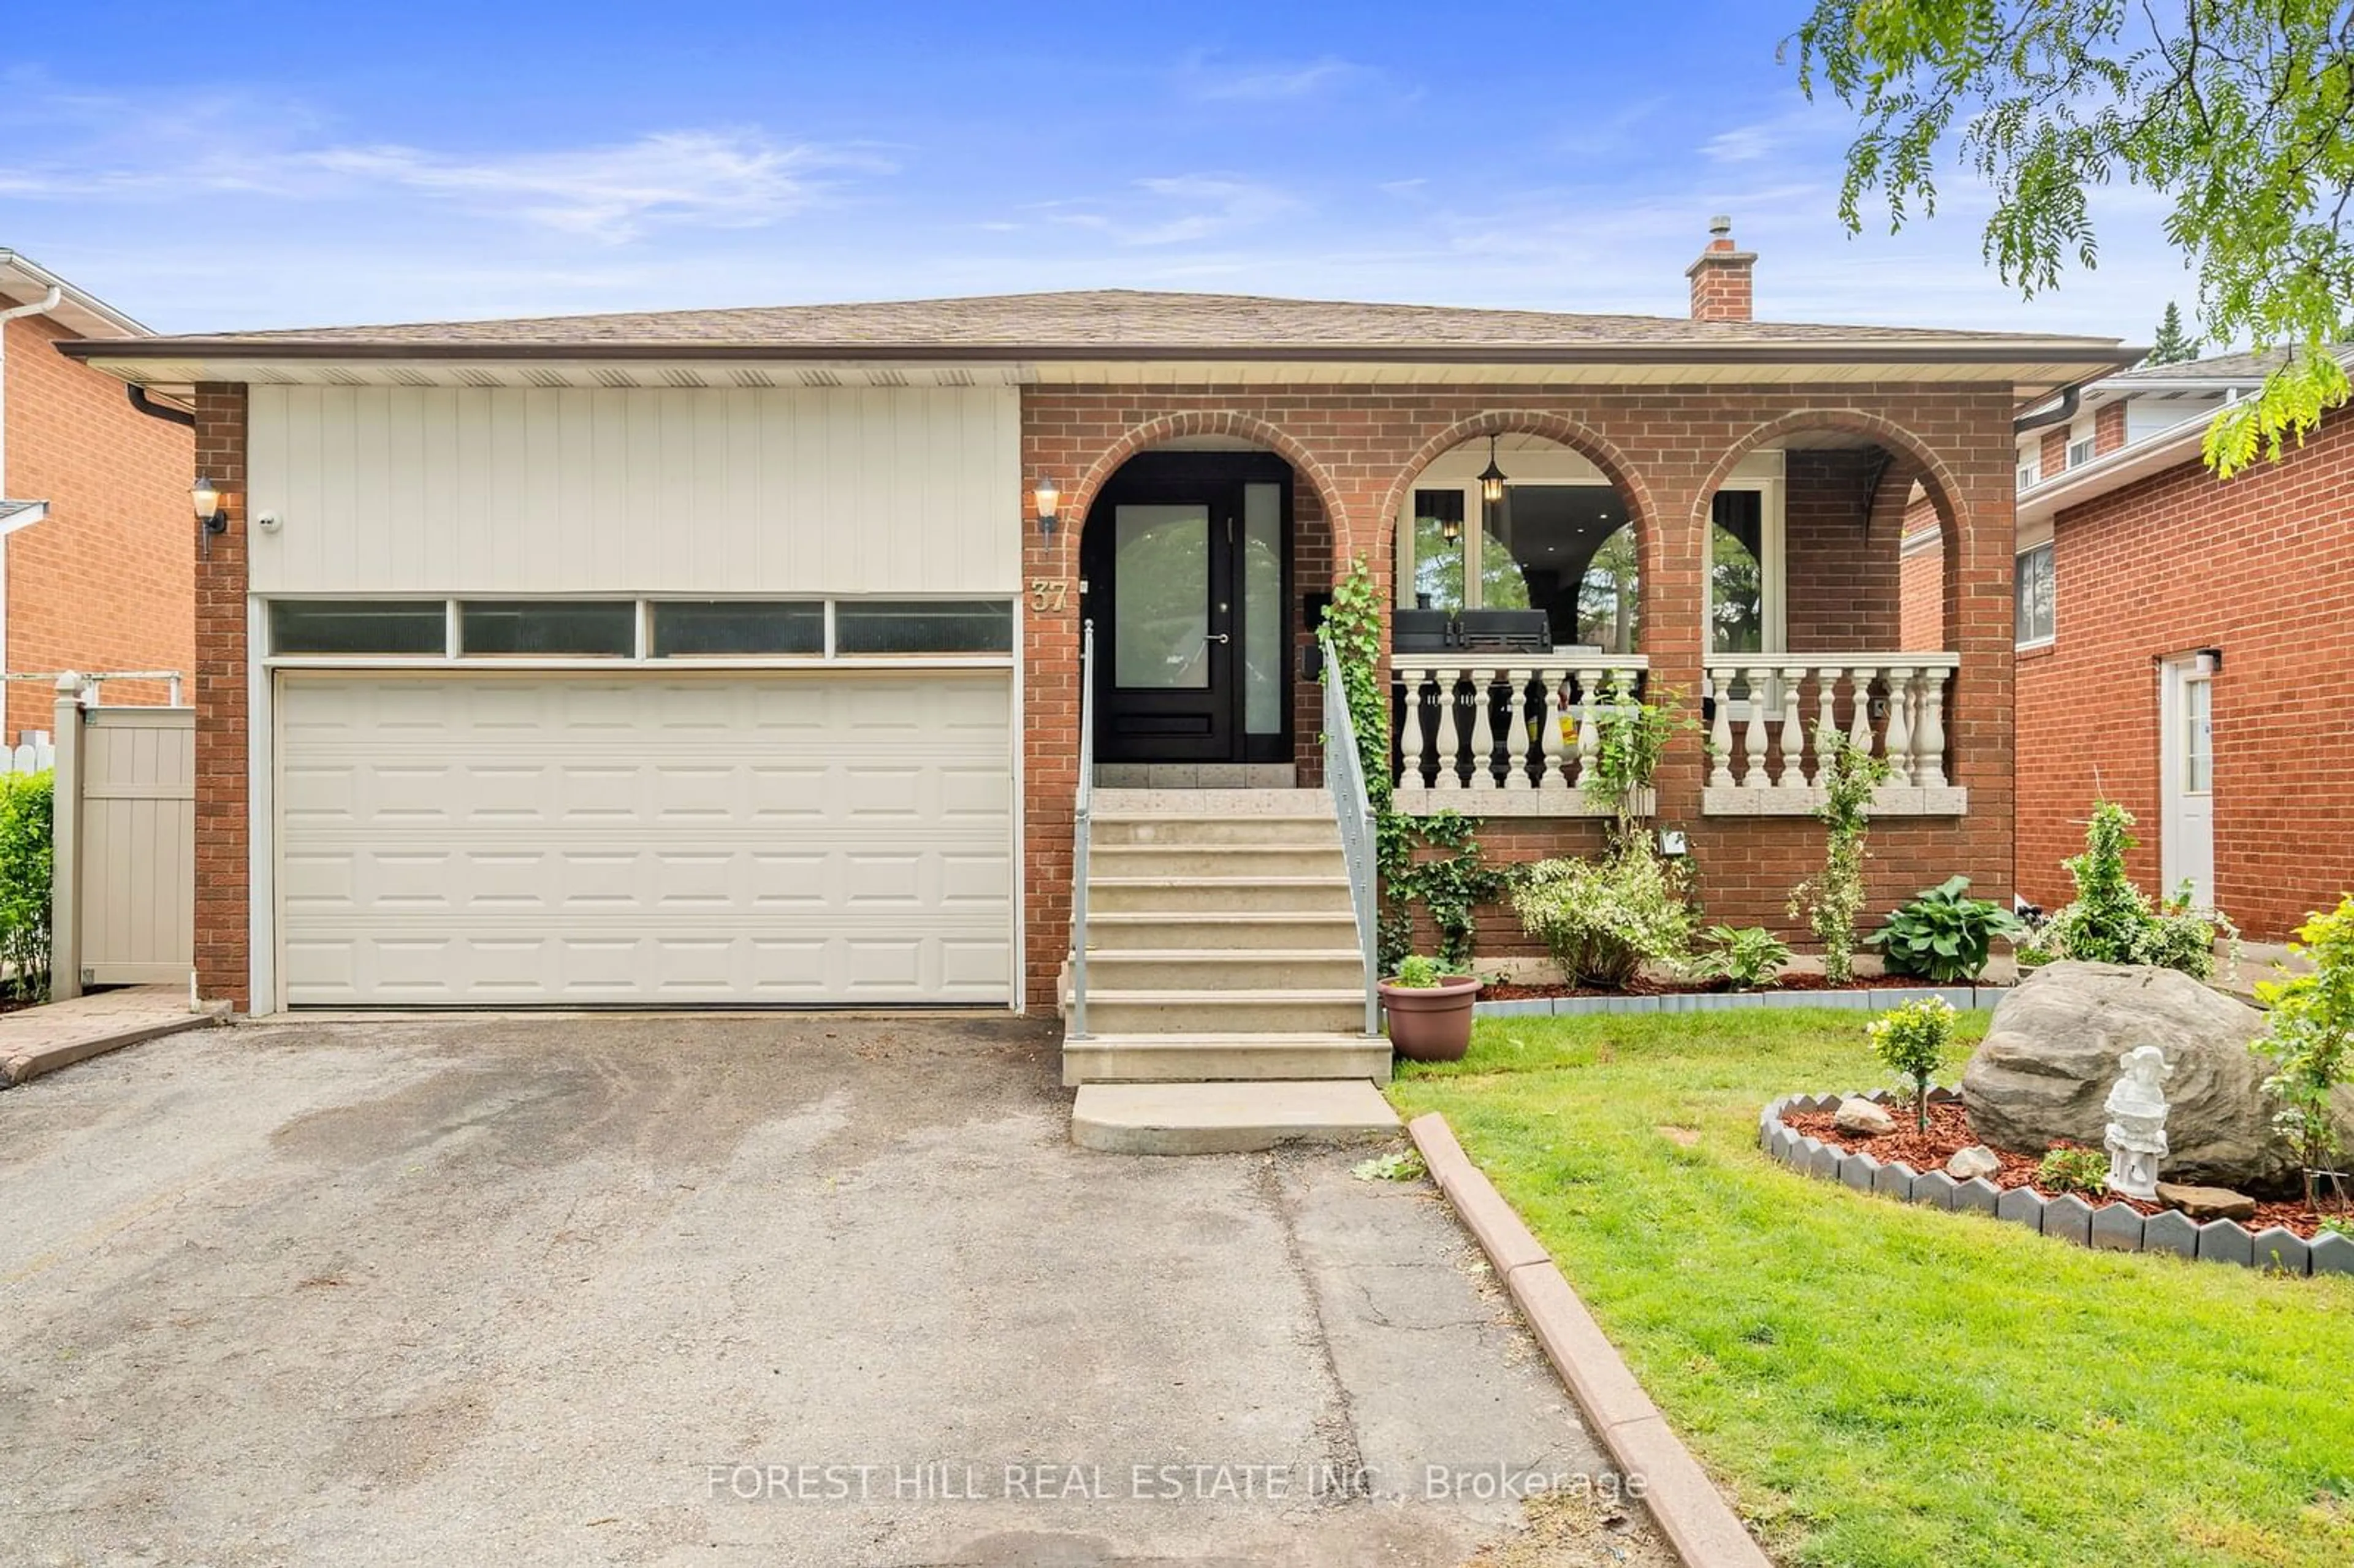 Home with brick exterior material for 37 Cherry Hills Rd, Vaughan Ontario L4K 1M2